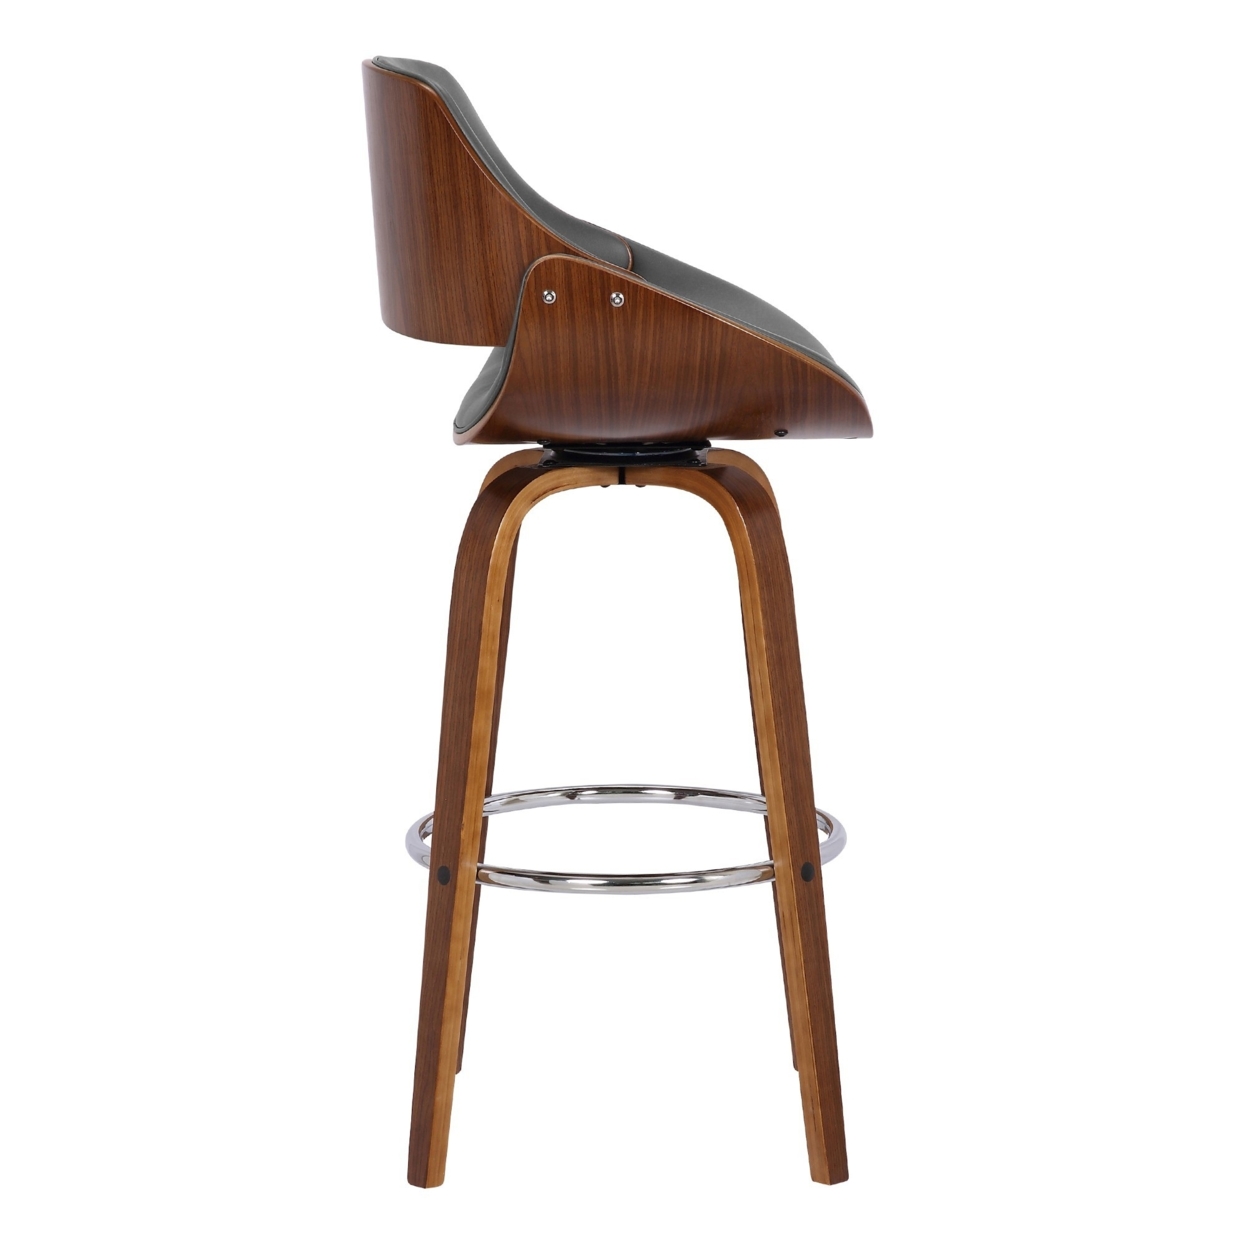 26 Inch Leatherette And Wooden Swivel Barstool, Brown And Gray- Saltoro Sherpi